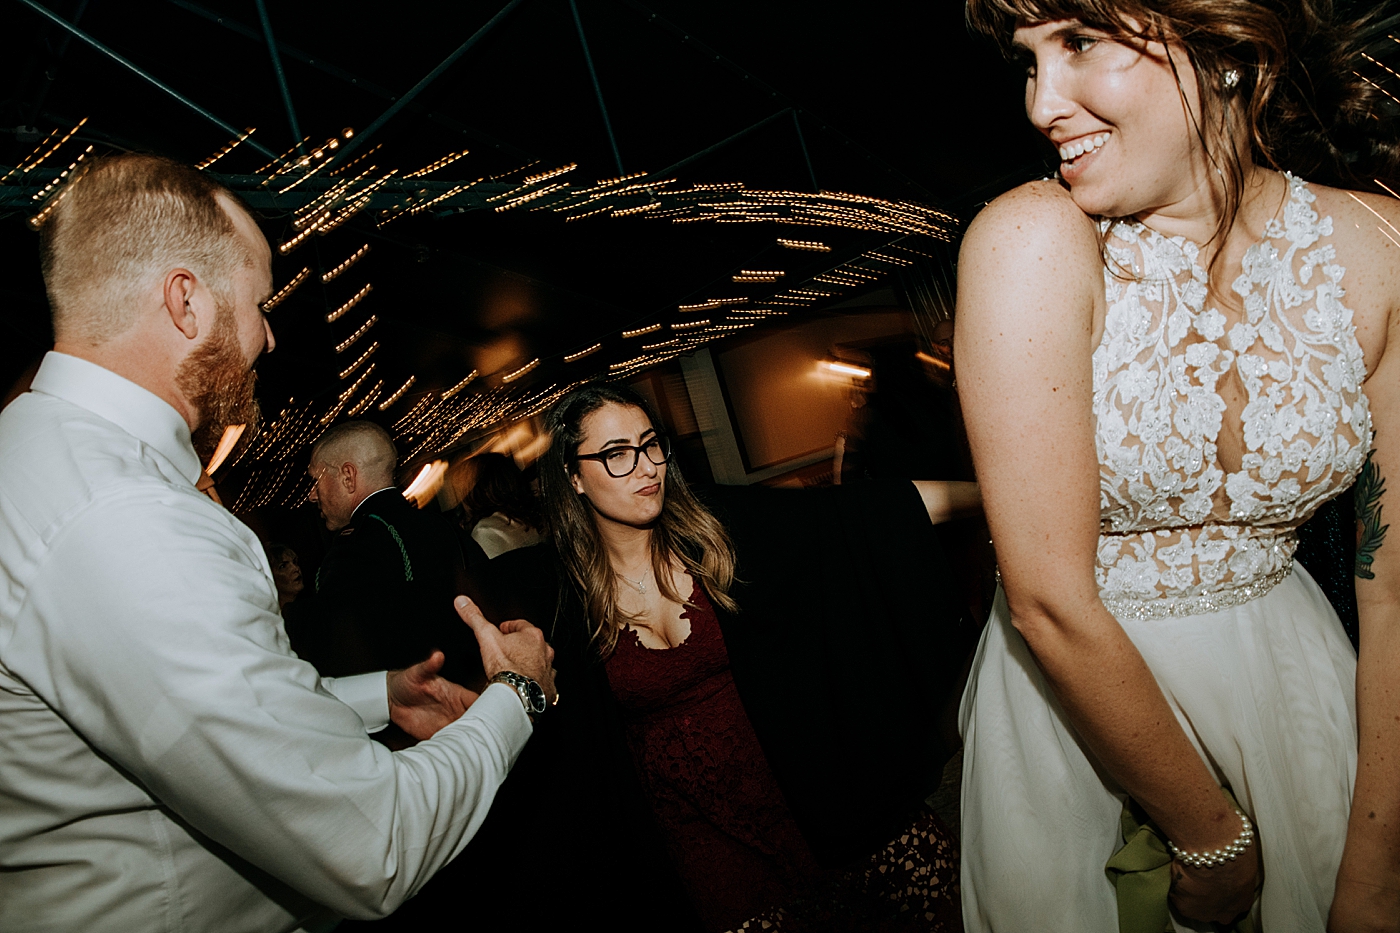 Bride and Groom dancing at the Reception Historic Stranahan House Wedding Photography captured by South Florida Wedding Photographer Maggie Alvarez Photography